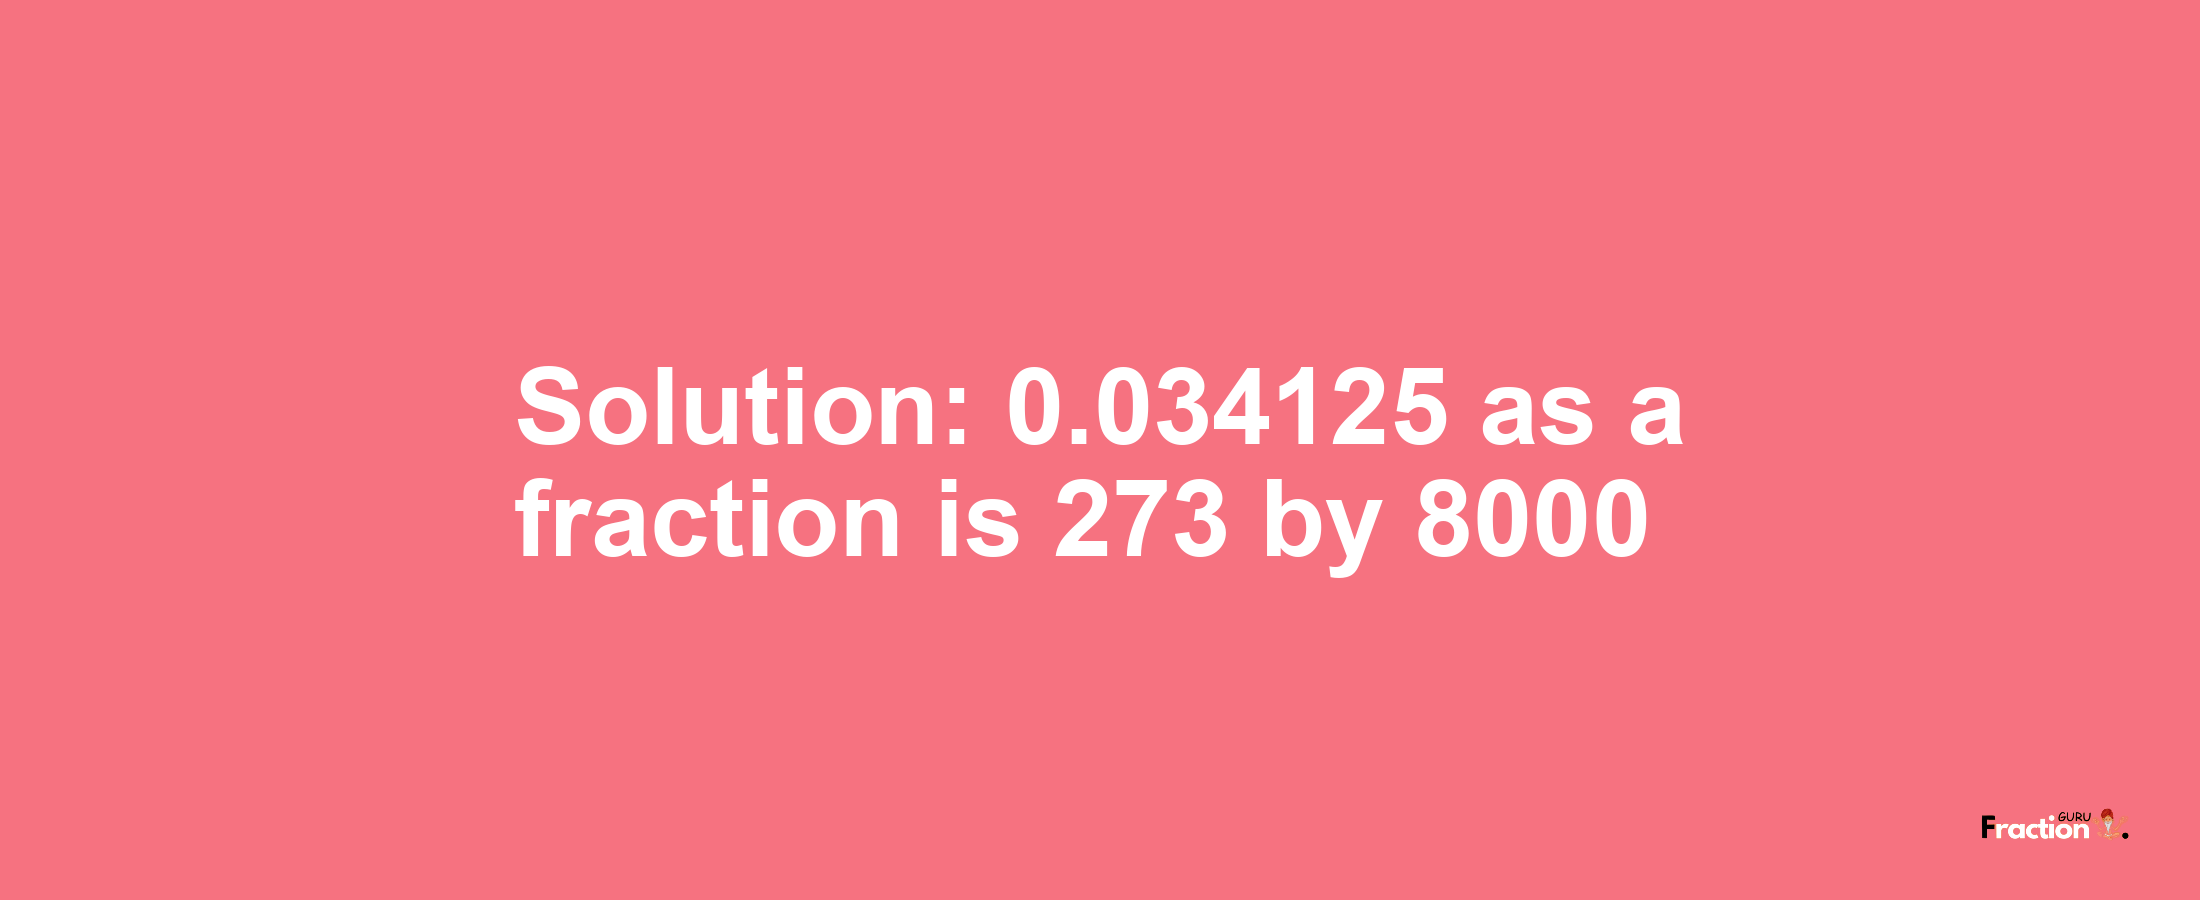 Solution:0.034125 as a fraction is 273/8000